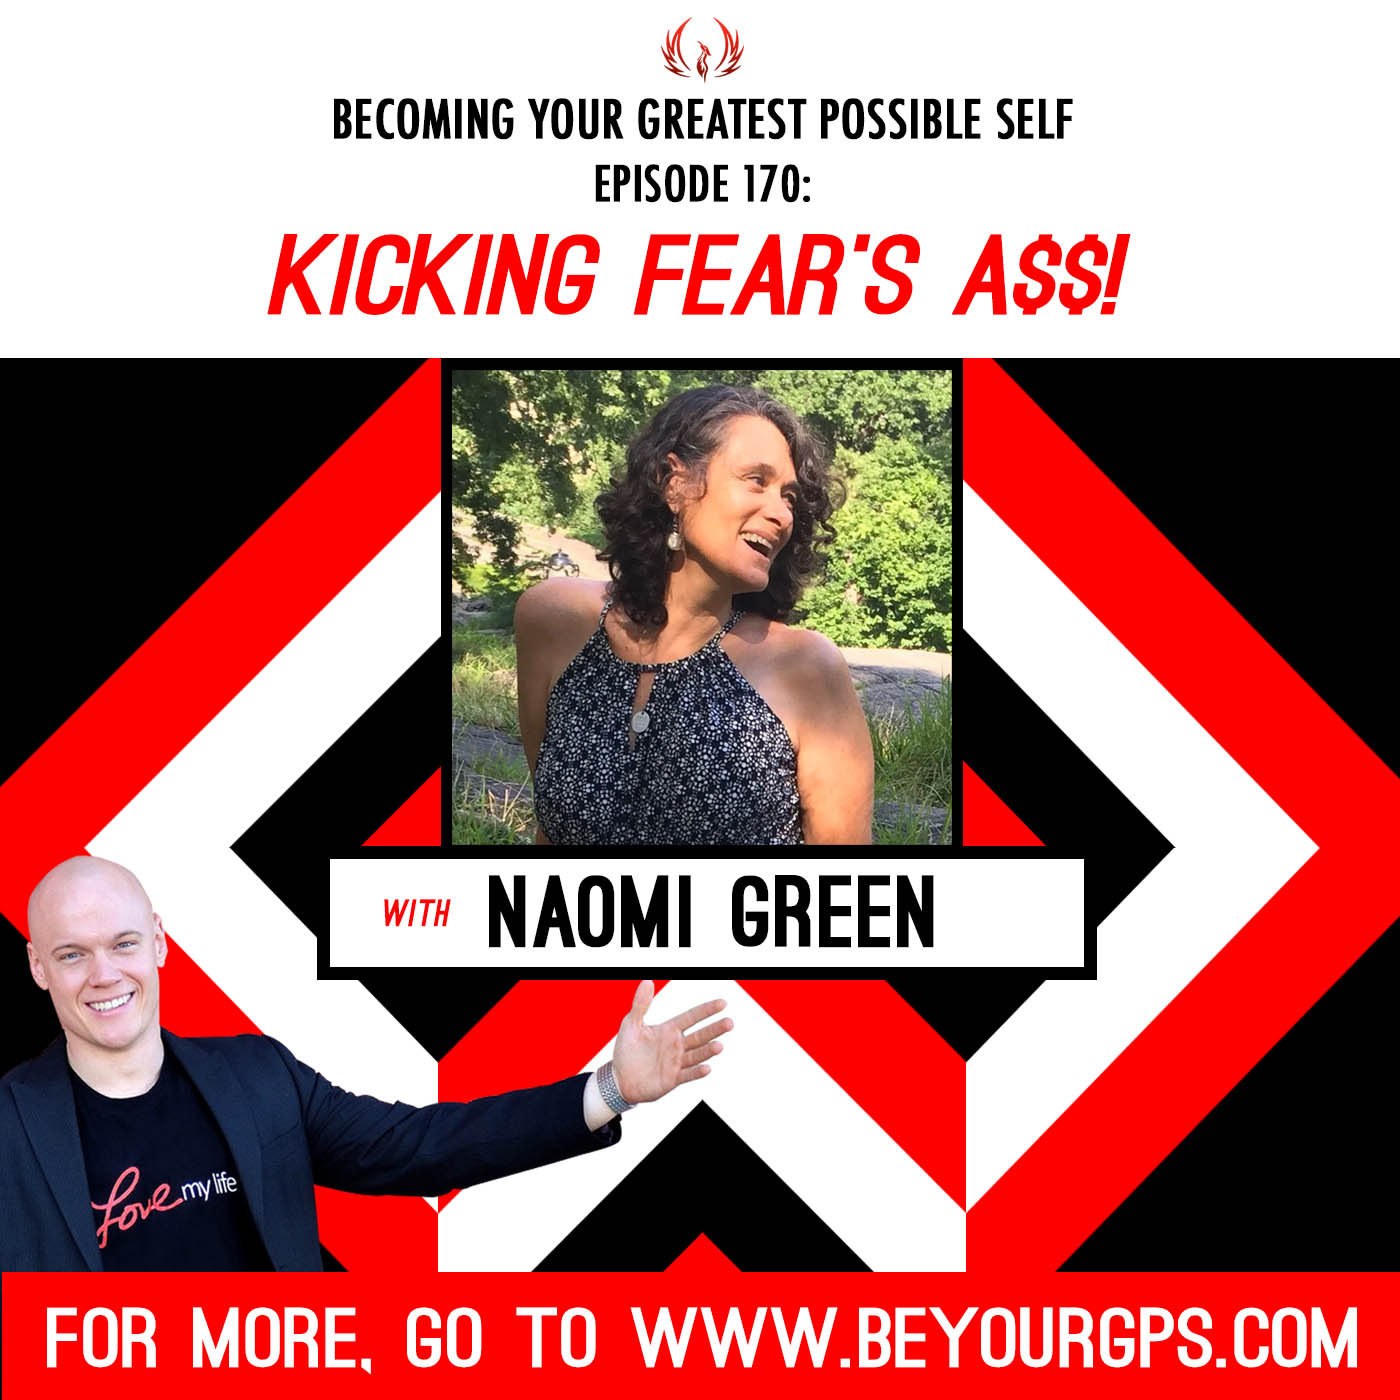 Kicking Fear’s A$$! with Naomi Green